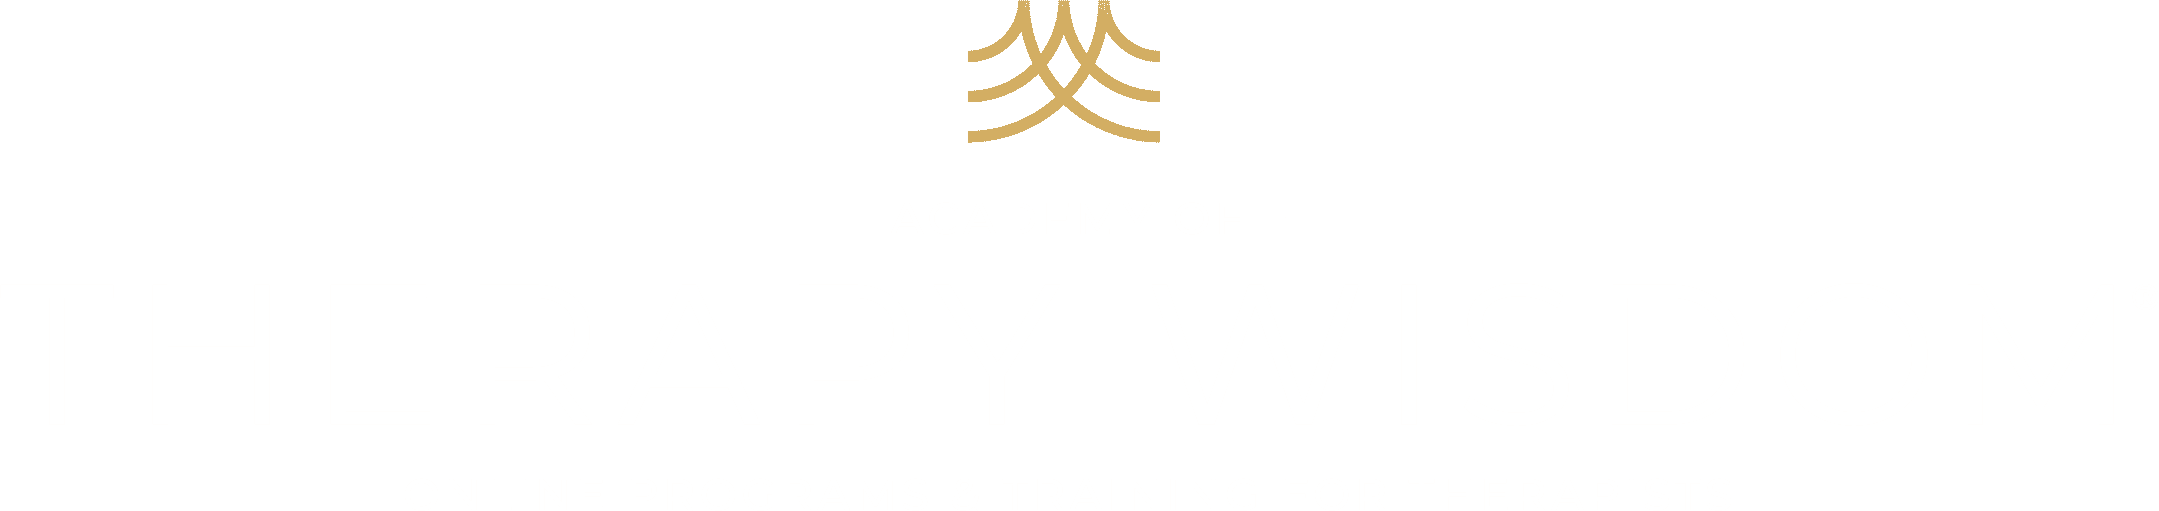 Academy of Therapy Wisdom - Online Programs and Training for Therapists